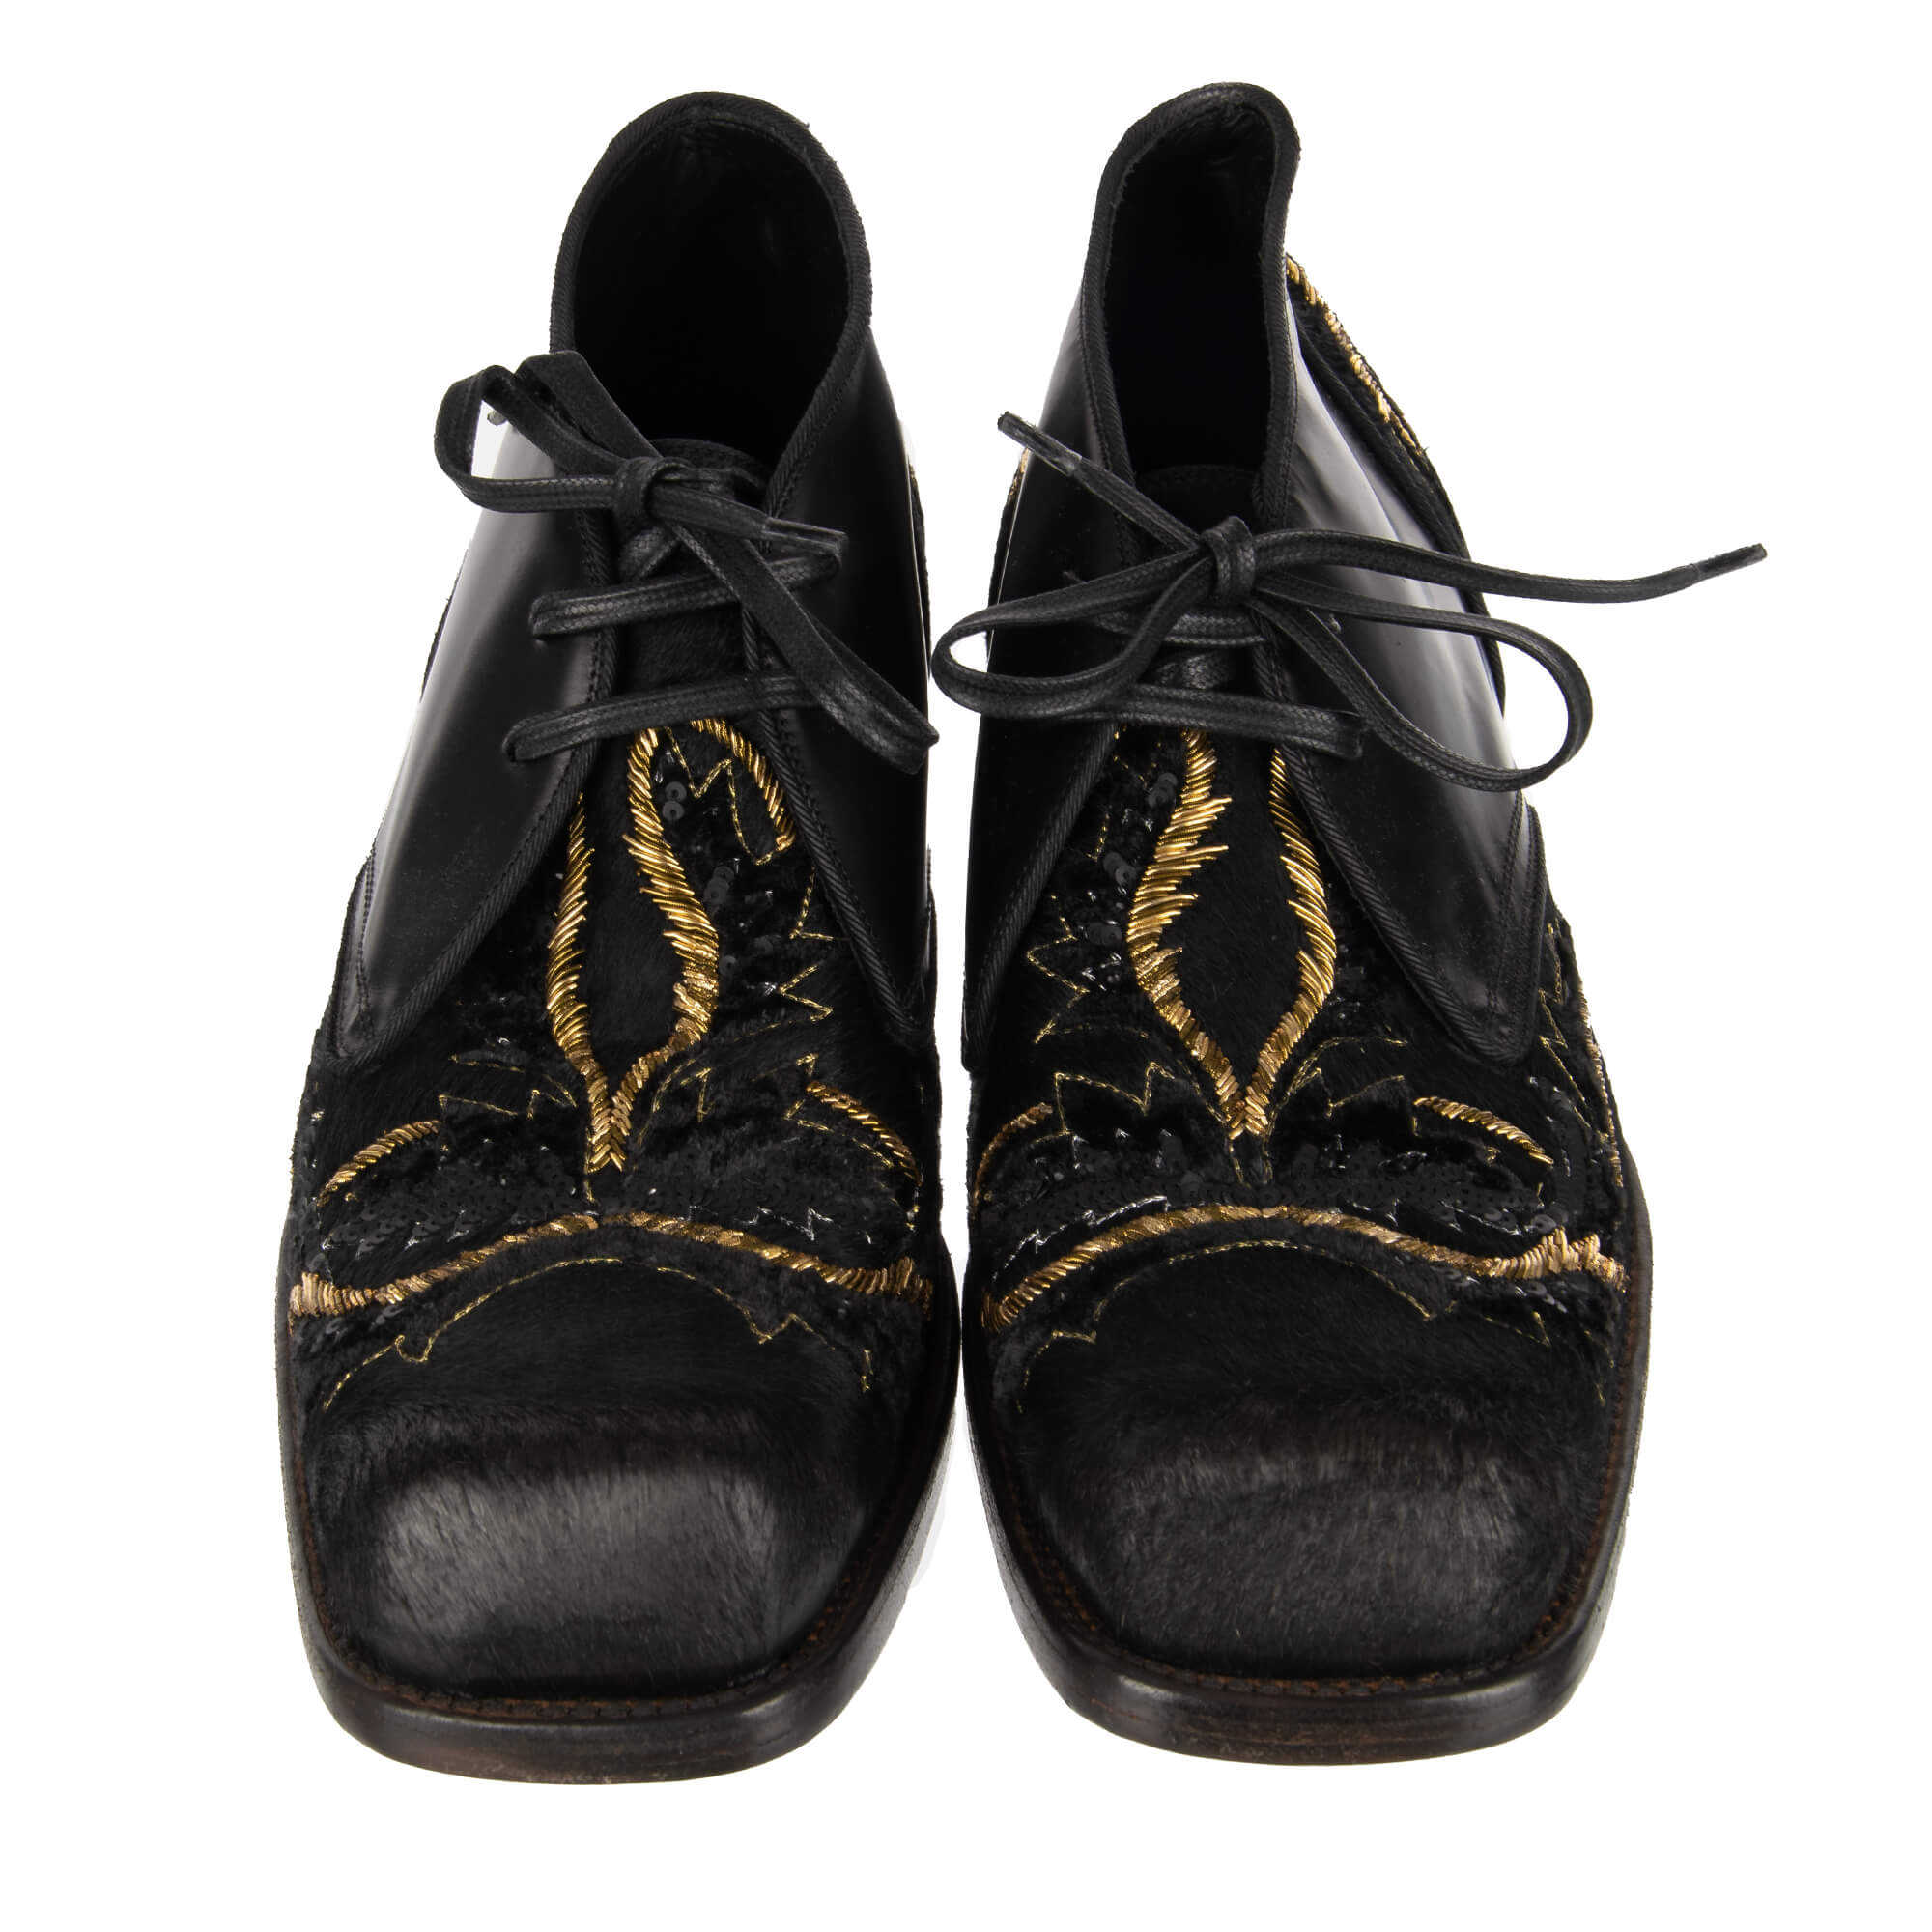 Dolce & Gabbana Baroque Gold Embroidery Ankle Boots Shoes SIRACUSA ...